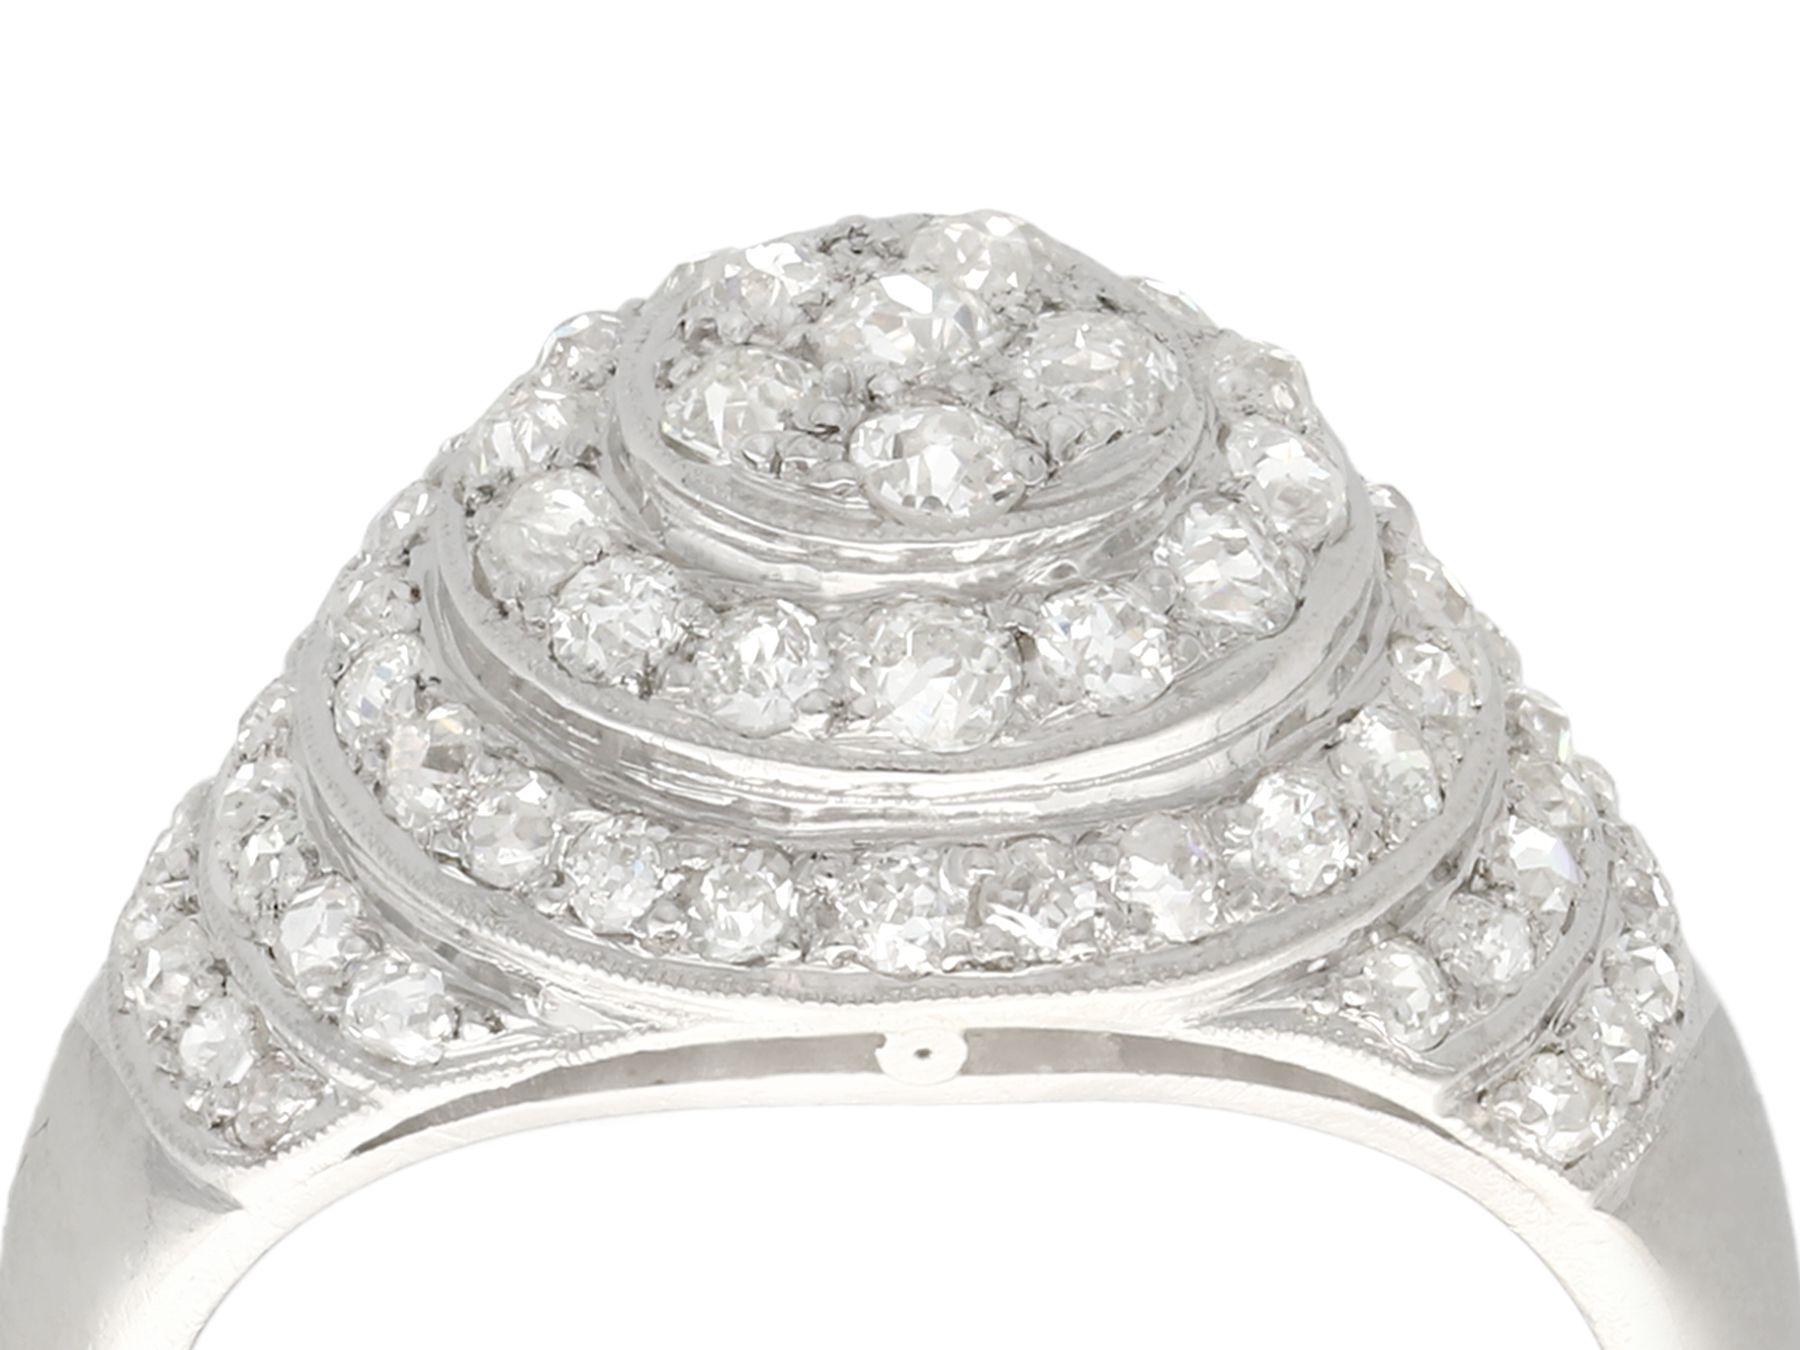 A stunning, fine and impressive vintage 1.48 carat diamond and platinum bombé style cocktail ring; part of our diverse diamond jewelry and estate jewelry collections.

This stunning, fine and impressive vintage diamond ring has been crafted in